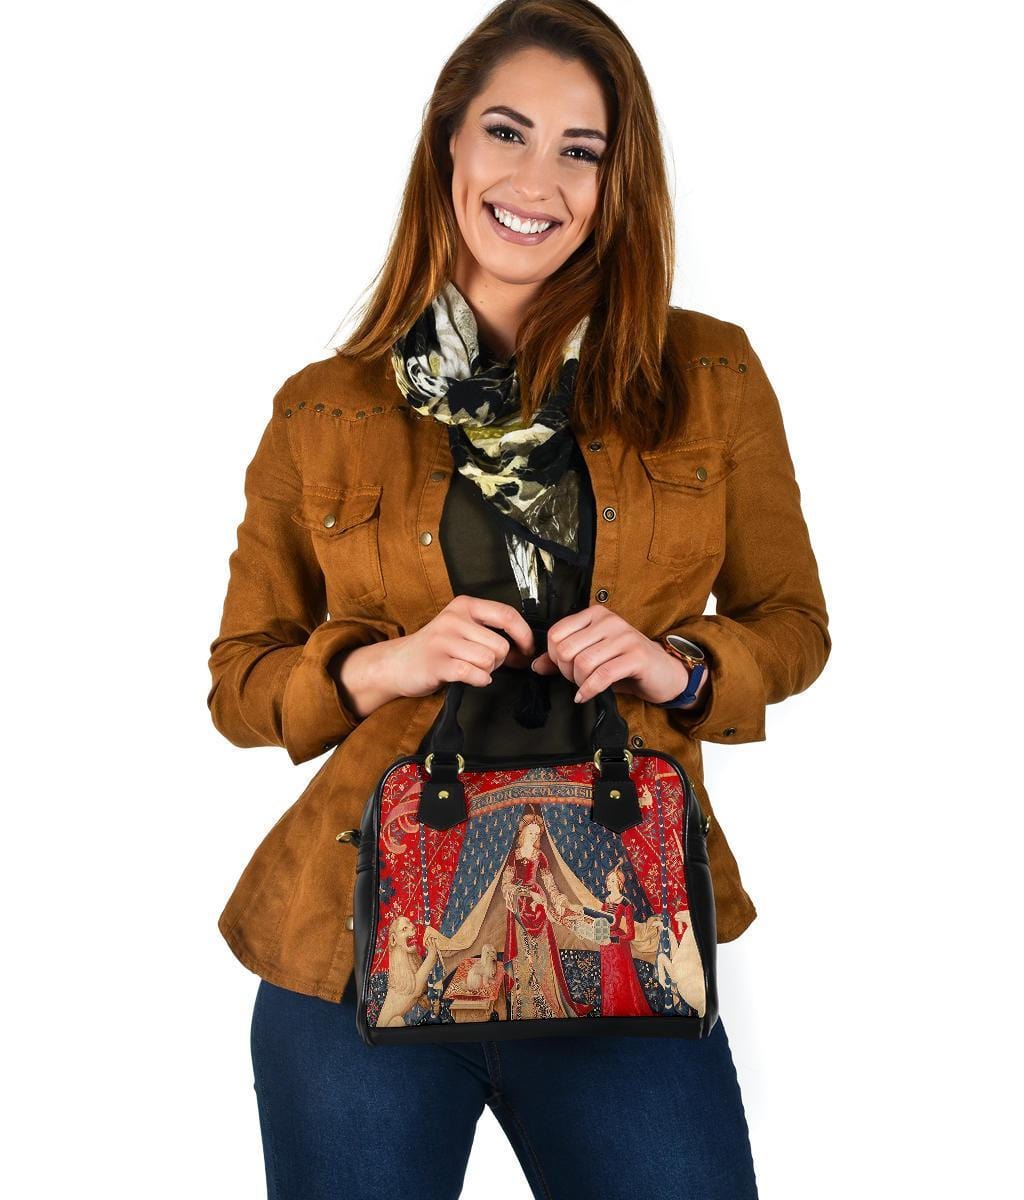 smiling woman having just received a gift of the The Lady & the Unicorn medieval tapestry artwork printed on a vegan leather women's handbag